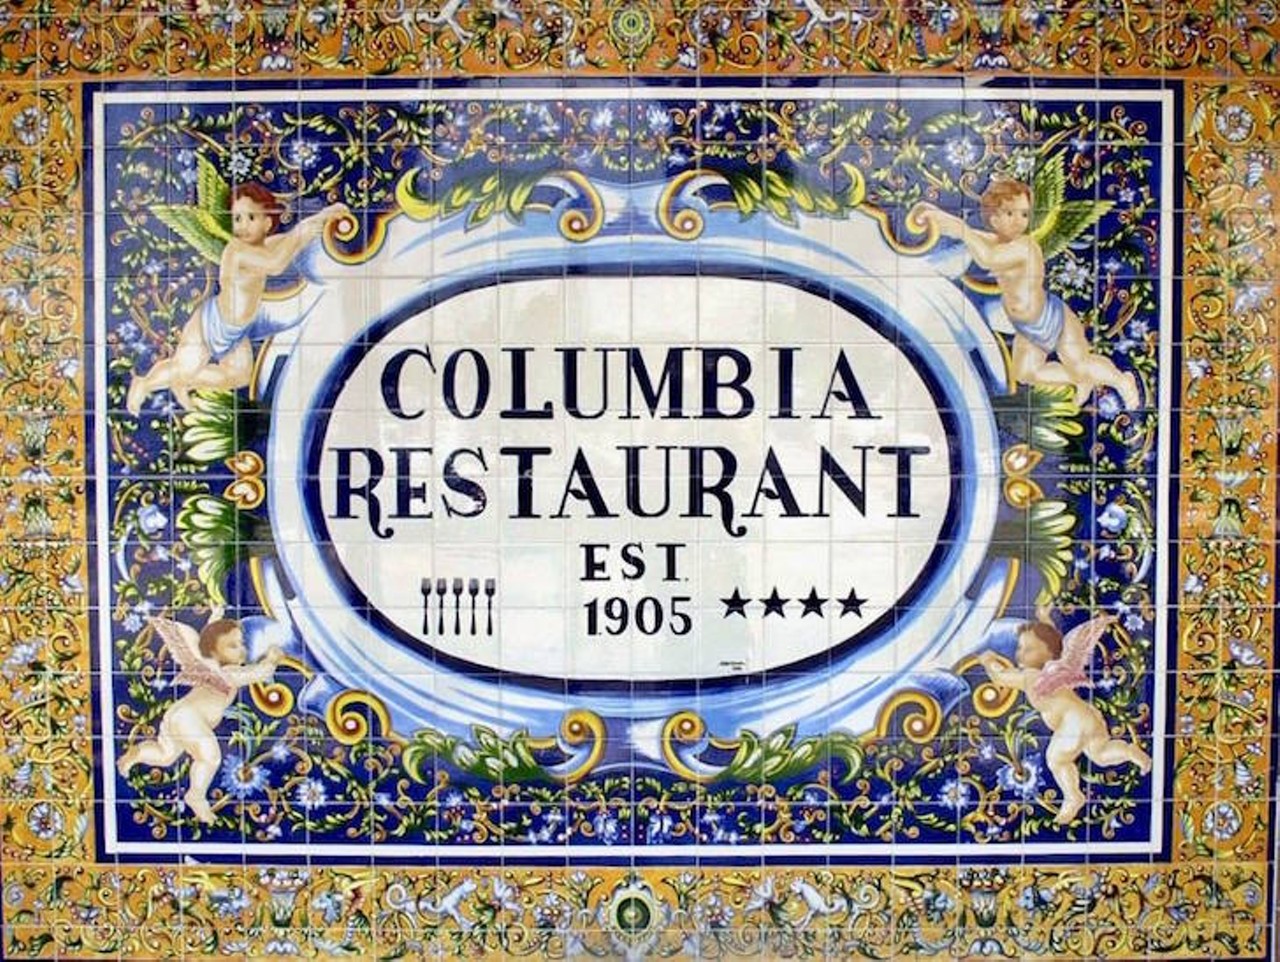 6. Columbia Restaurant&nbsp;
4 out 5 stars, 2197 reviews
2117 E 7th Ave, Ybor City, Tampa 
"I've been to the Columbia before while in Tampa a few times for dinner.  This time for a causal holiday lunch.  Enjoyable and predictable..  not bad thing though.  I wanted something known - a taste of home after a long day playing tourist .  We ordered the Columbia traditional 1905 Salad as a side to our entrees- Boliche Asado and Milanese Steak.  Both are abundant servings. Delicious and rich in flavor.  On the Milanese which is more than a generous serving - the breading was not overwhelming and loved that the rice and beans in with the boliche had chopped raw white onions on top. I could not resist the Flan dessert.  Just like my grandmother's" - Lorraine M.
Photo by Columbia Restaurant/Facebook